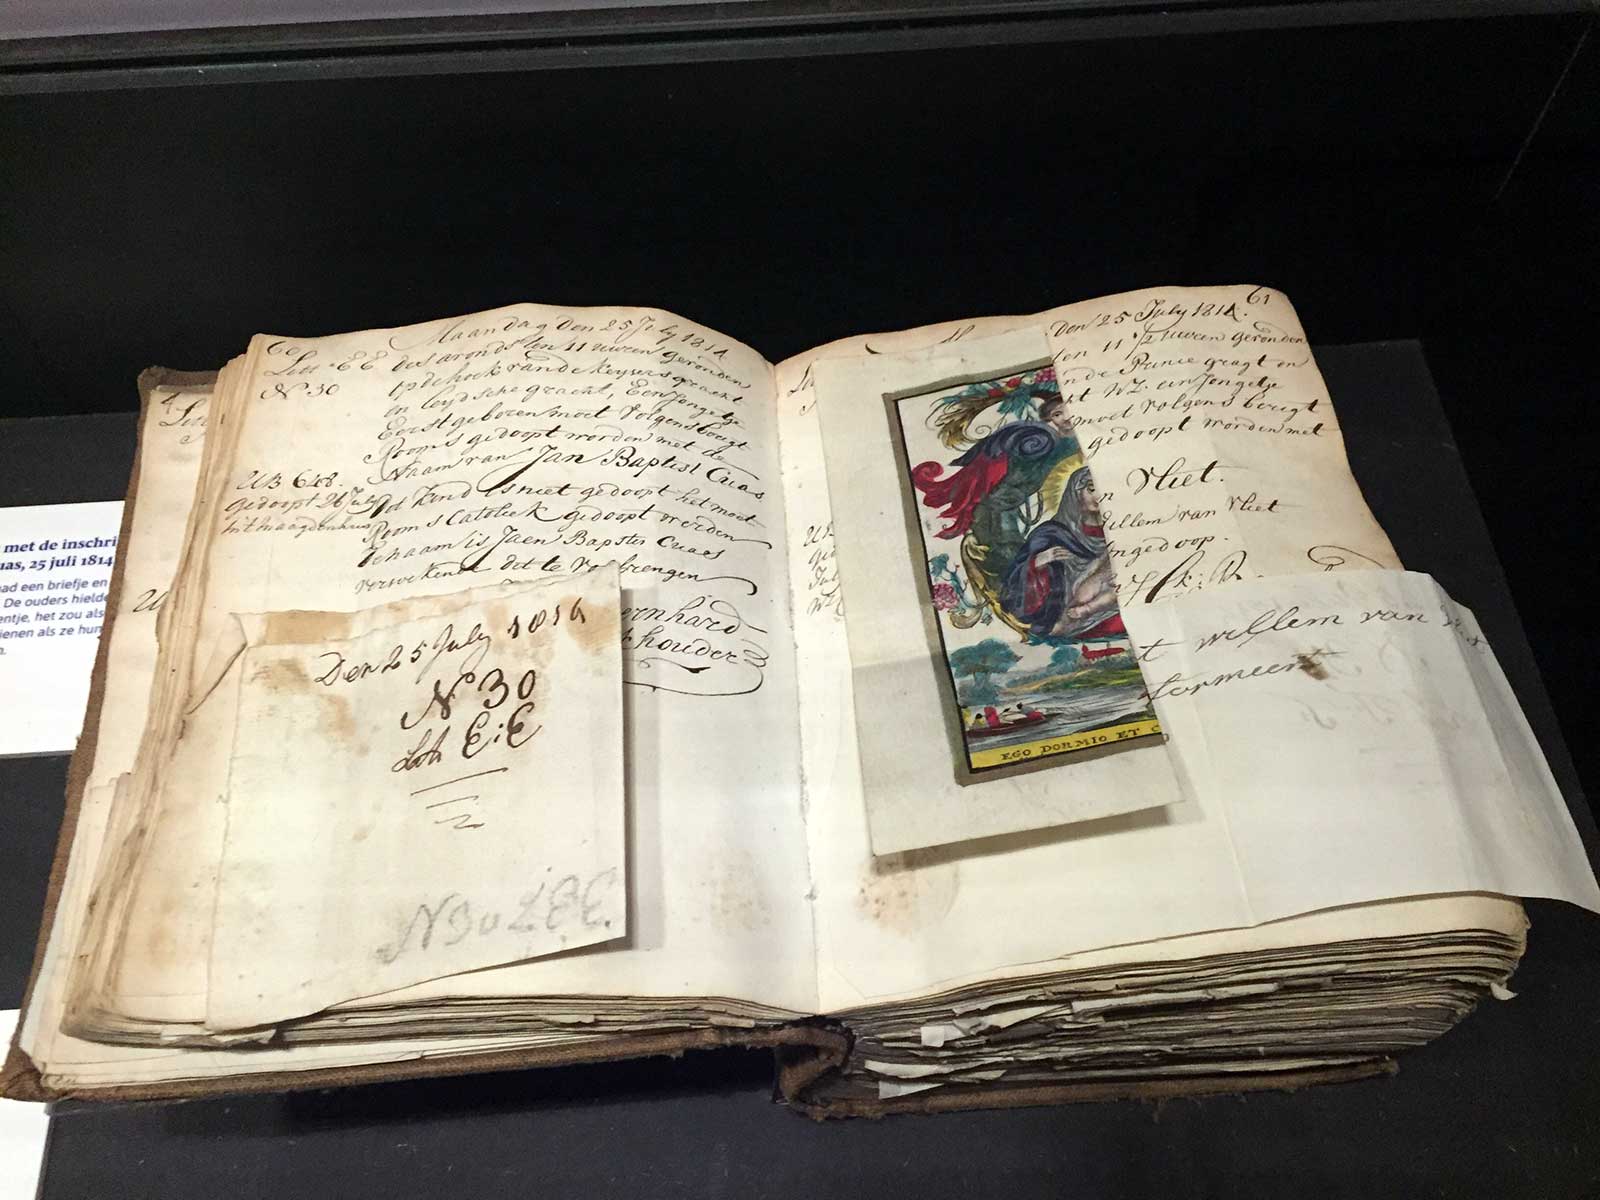 Page in the intake registry of the Aalmoezeniersweeshuis, Amsterdam, with prayer card cut in half